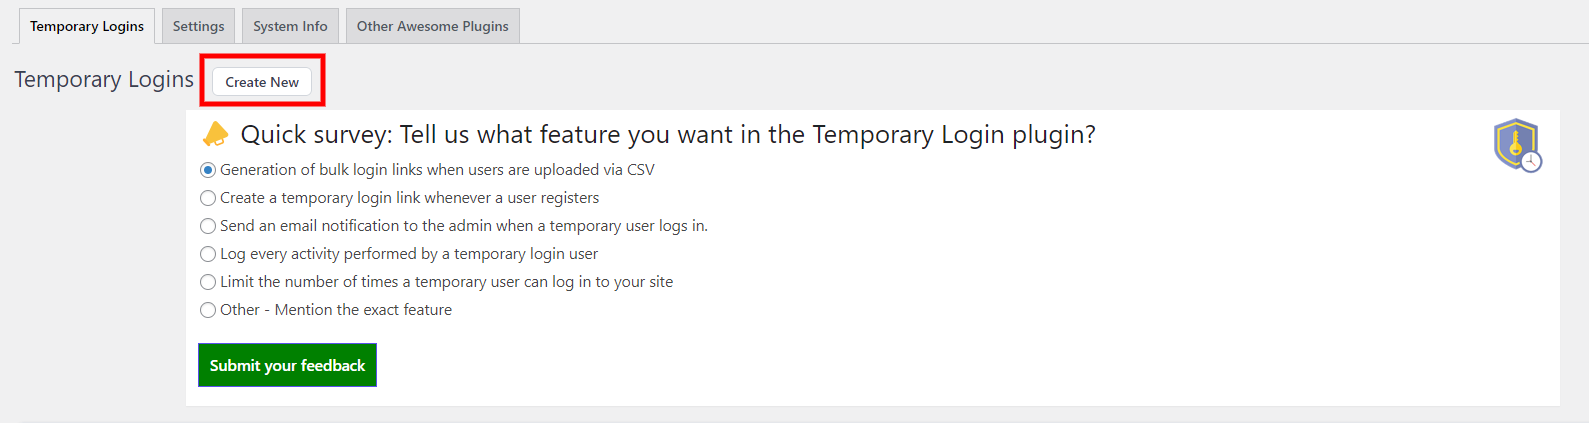 create new temporary login without password plugin